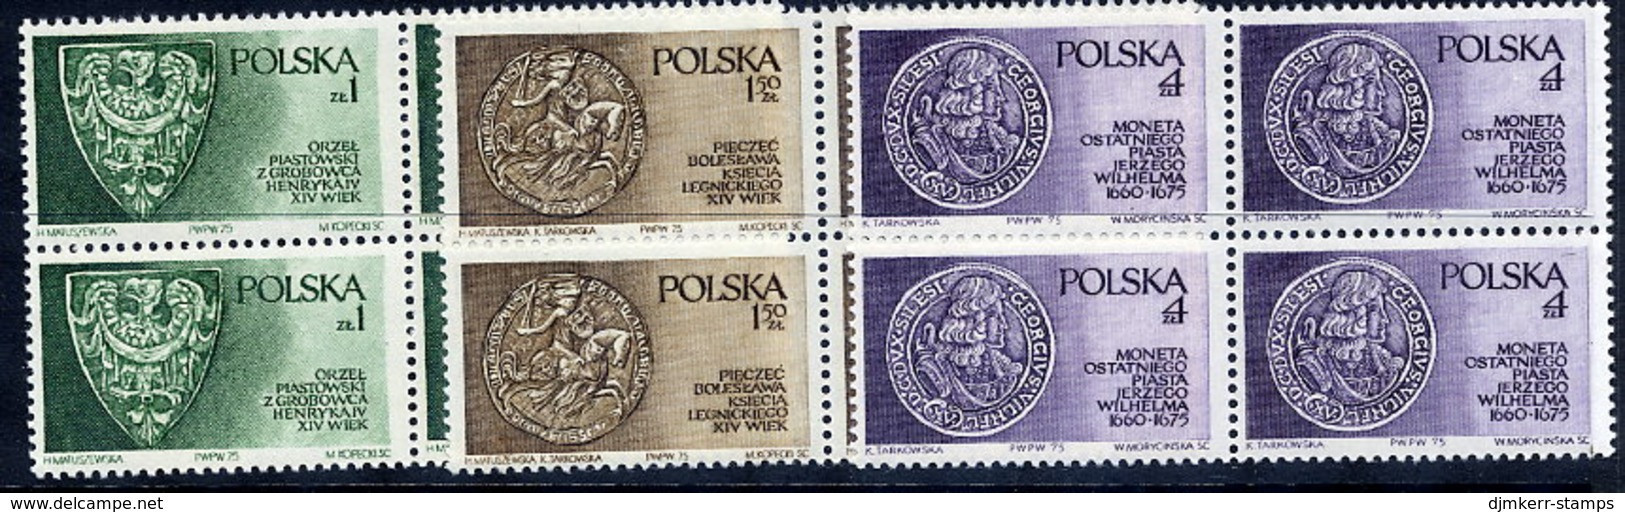 POLAND 1975 Piast Dynasty In Blocks Of 4 MNH / **. Michel 2416-18 - Unused Stamps